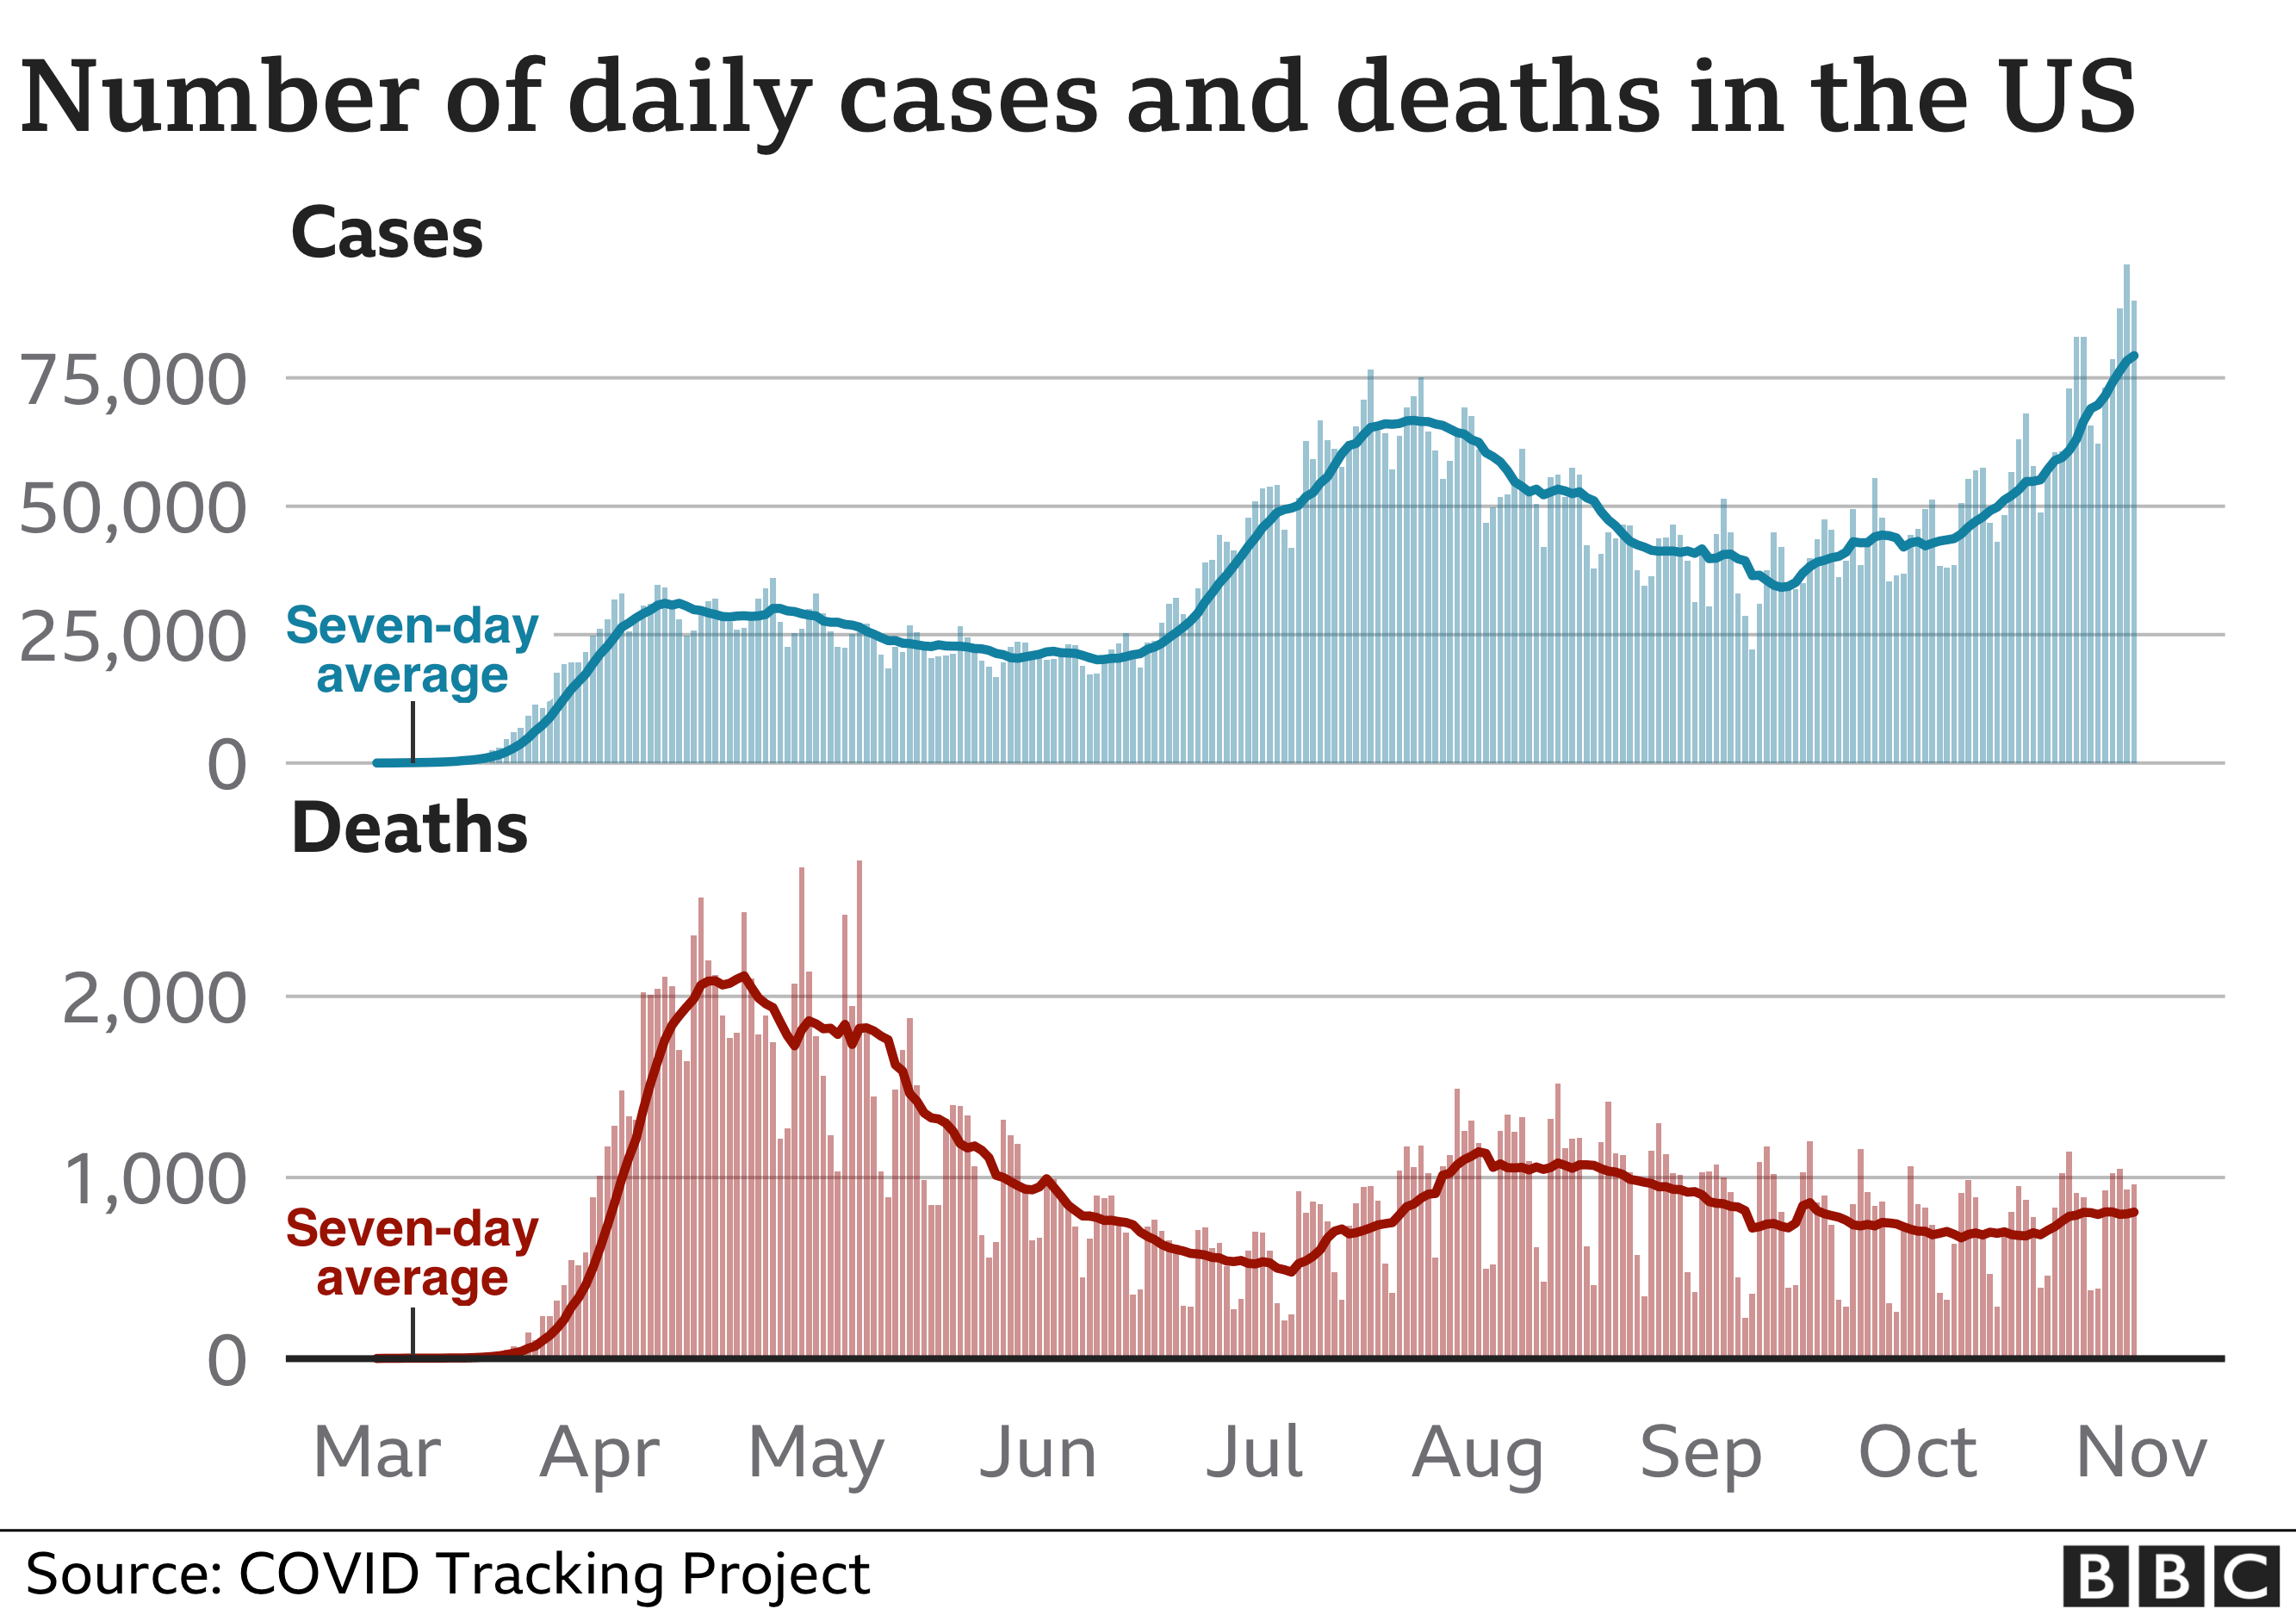 Chart shows daily cases and deaths in the US